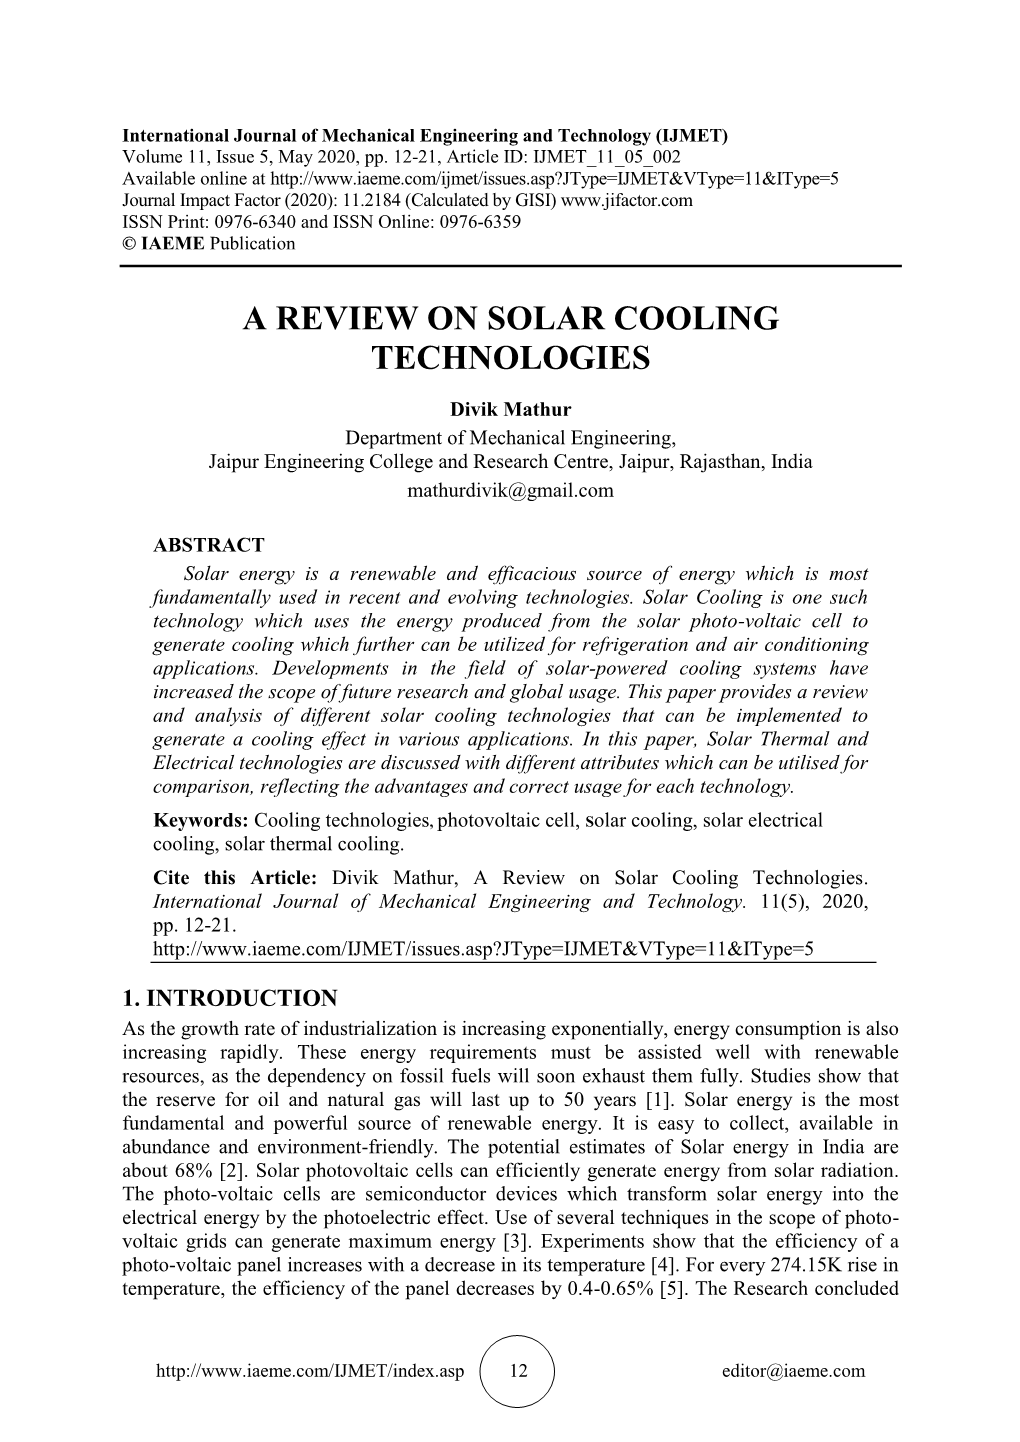 A Review on Solar Cooling Technologies